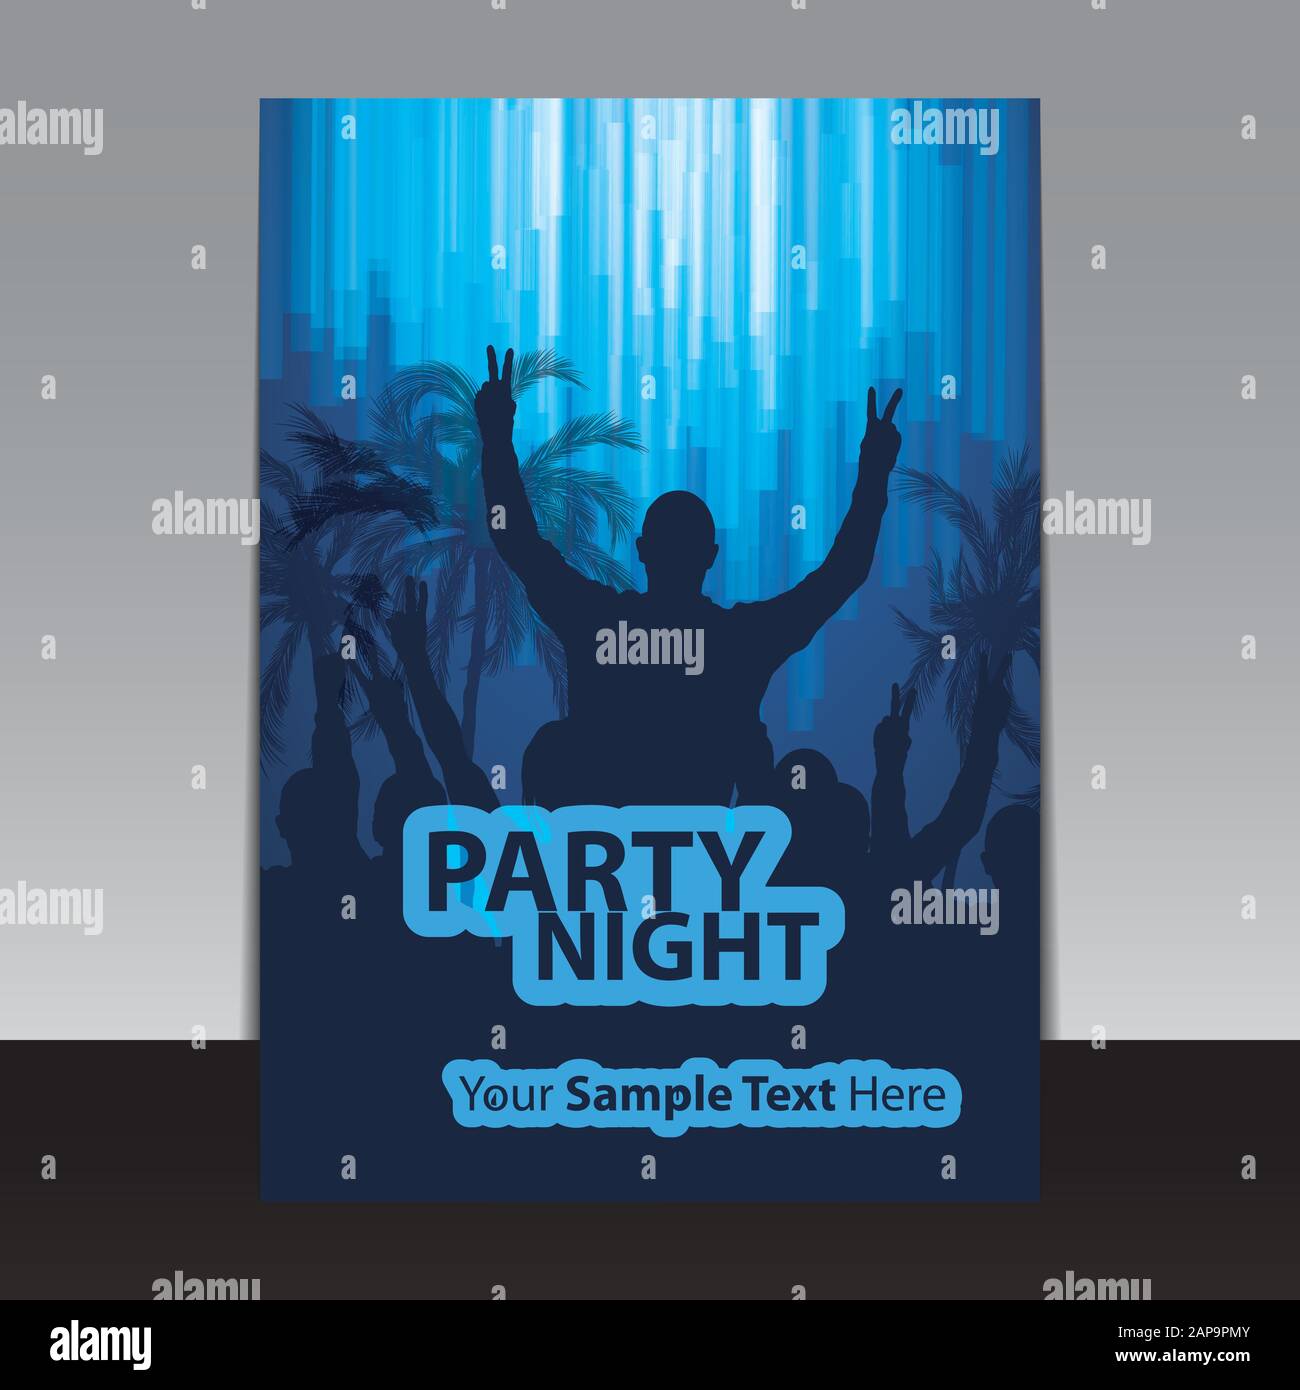 Flyer or Cover Design - Ad Template for Party Night, Celebration Event or Concert -  Beach Party Poster or Cover with Dancing Crowd, People - Vector Stock Vector